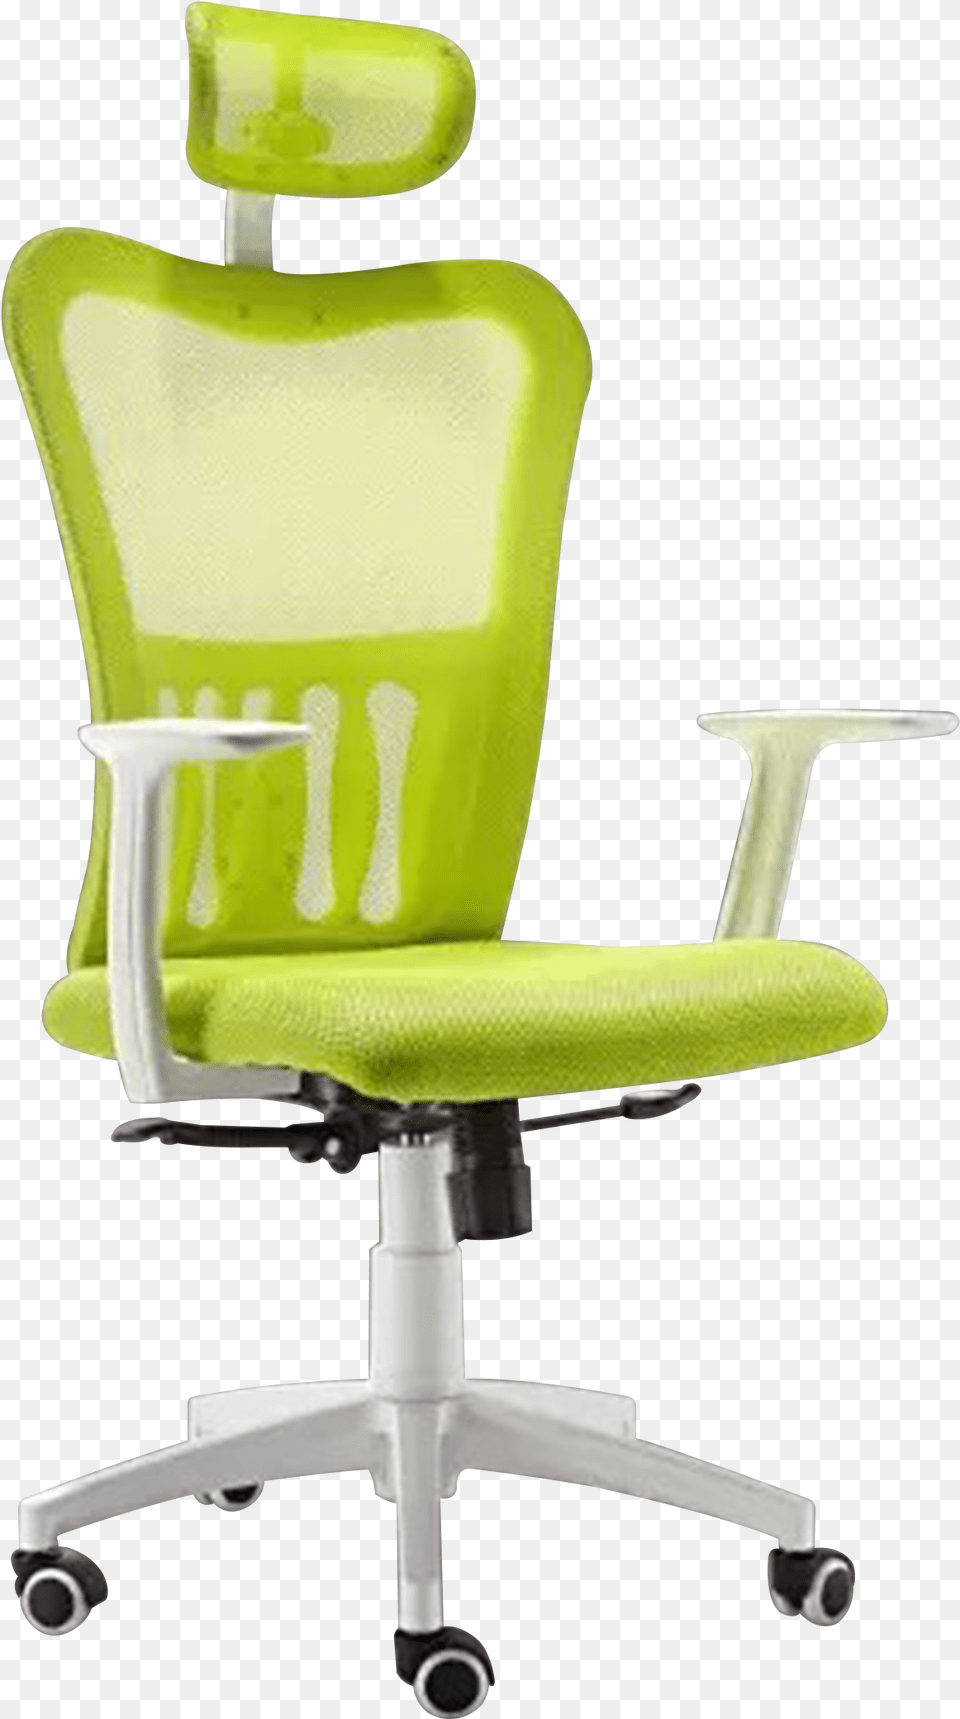 Welcome To Csc Office Nejlepsi Kancelarska Zidle, Chair, Cushion, Furniture, Home Decor Free Png Download